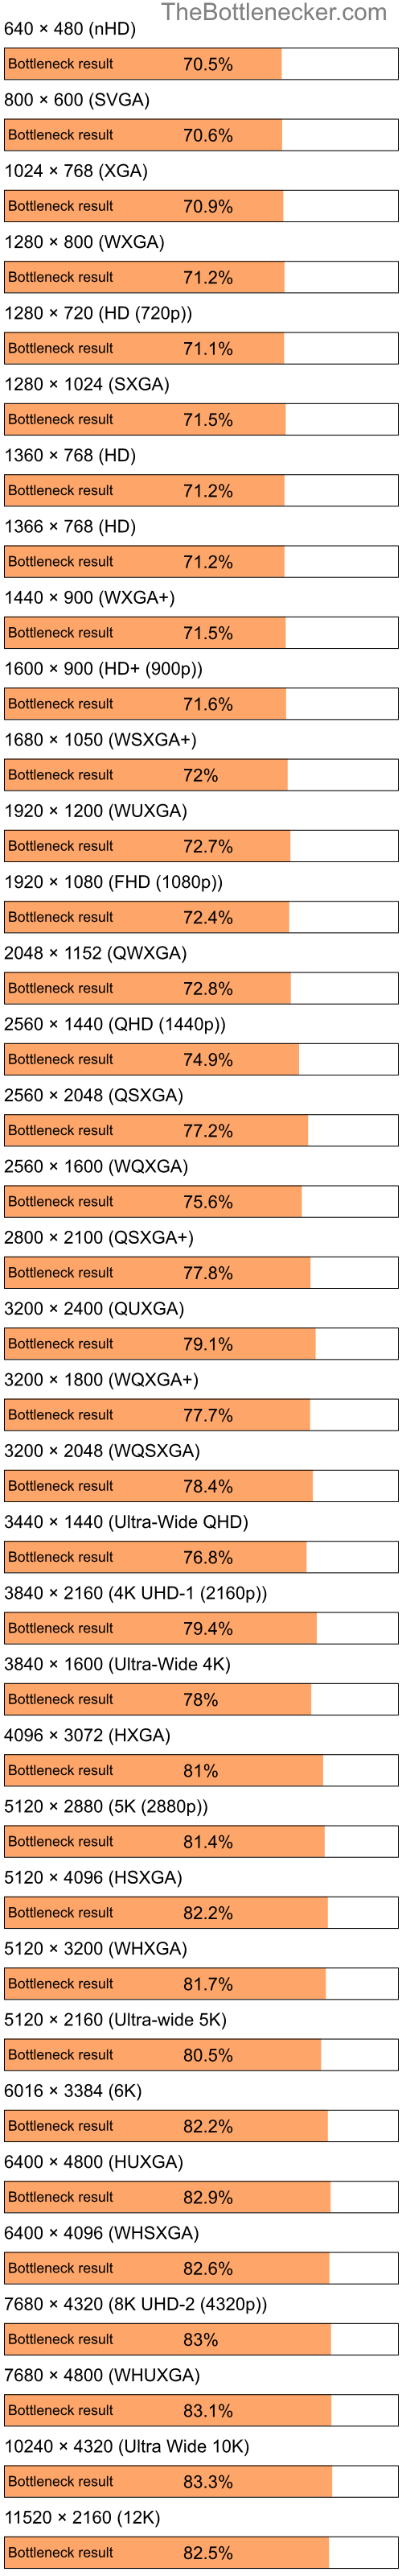 Bottleneck results by resolution for Intel Celeron and NVIDIA Quadro NVS 295 in Graphic Card Intense Tasks